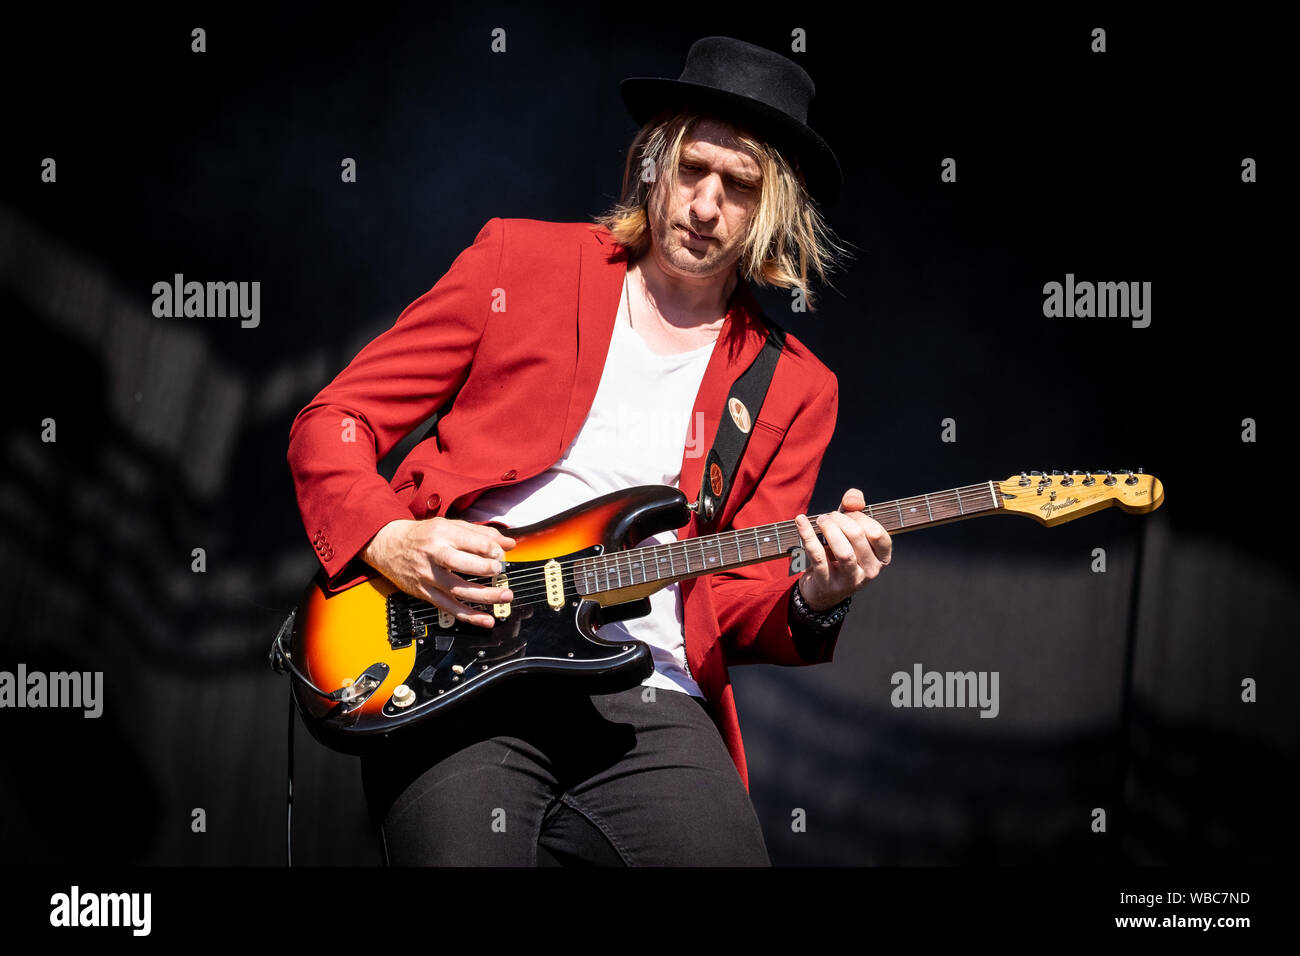 Trondheim, Norway. 2nd, June 2018. The British hard rock band Inglorious performs a live during the Norwegian music festival Trondheim Rocks 2018 in Trondheim. Here guitarist Drew Lowe is seen live on stage. (Photo credit: Gonzales Photo - Tor Atle Kleven). Stock Photo